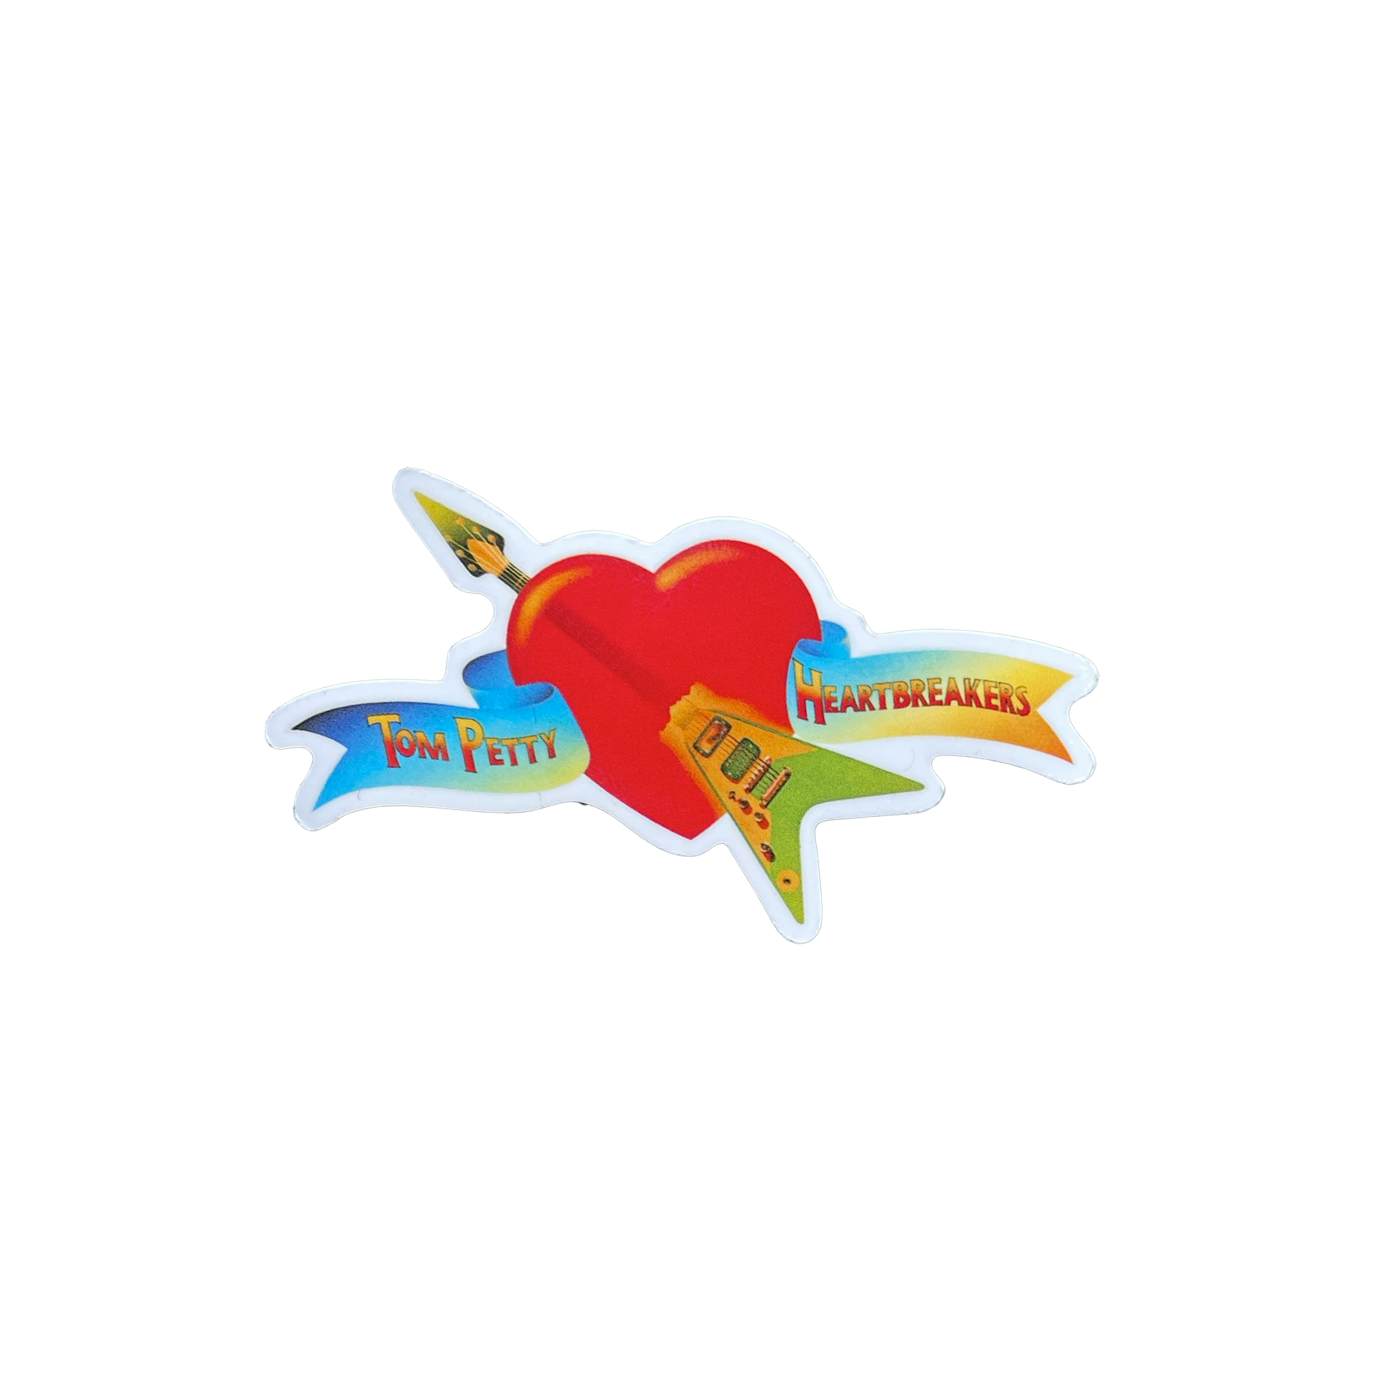 Tom Petty and the Heartbreakers Classic Logo Bumper Magnet